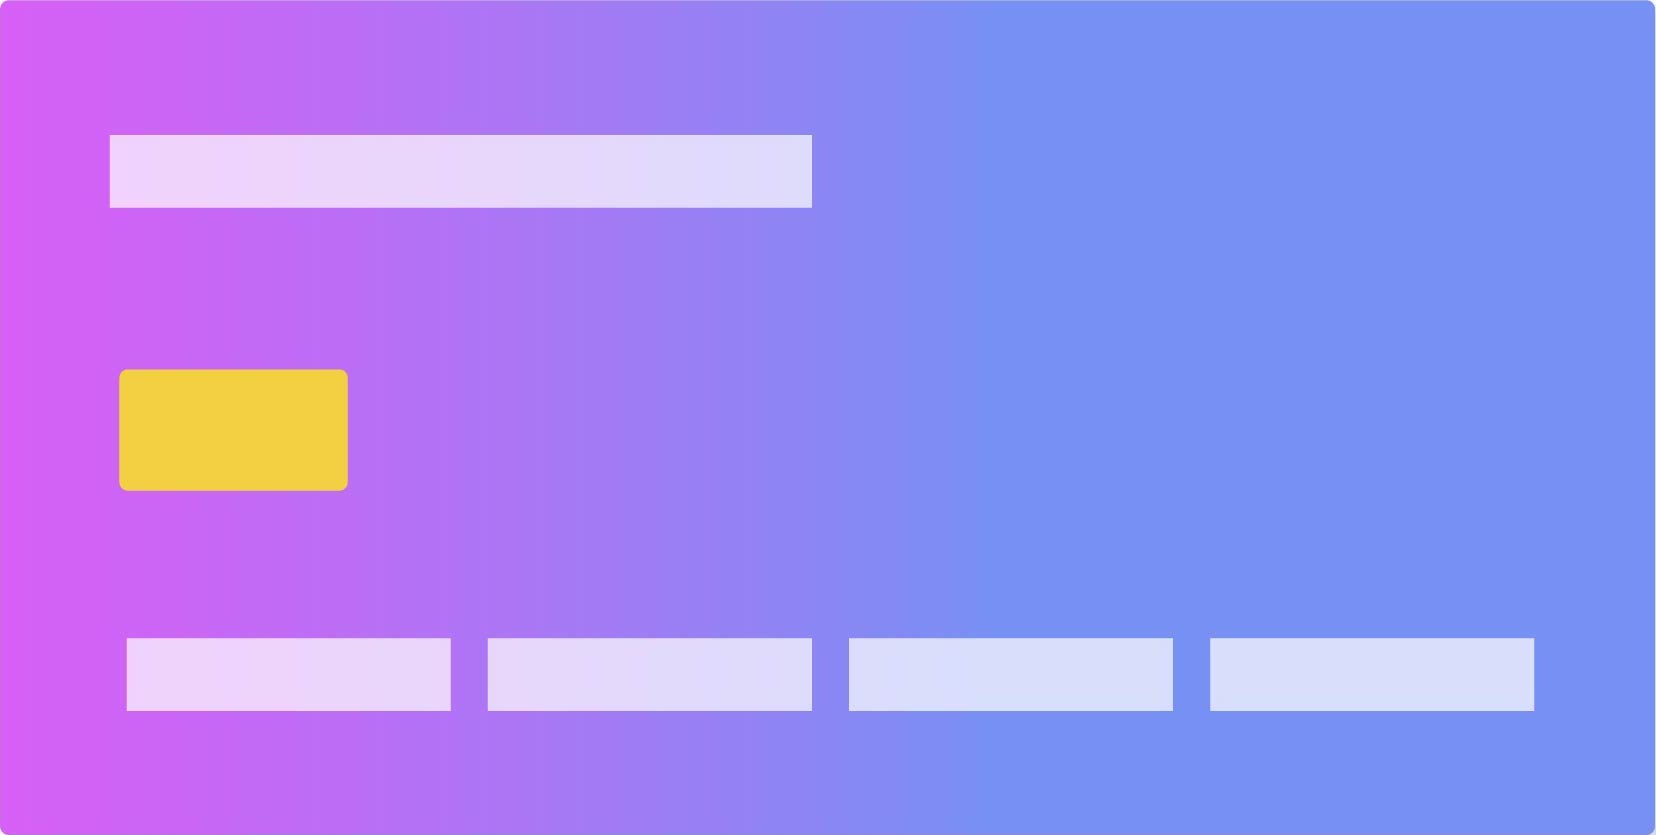 A blue and purple mockup of a credit card